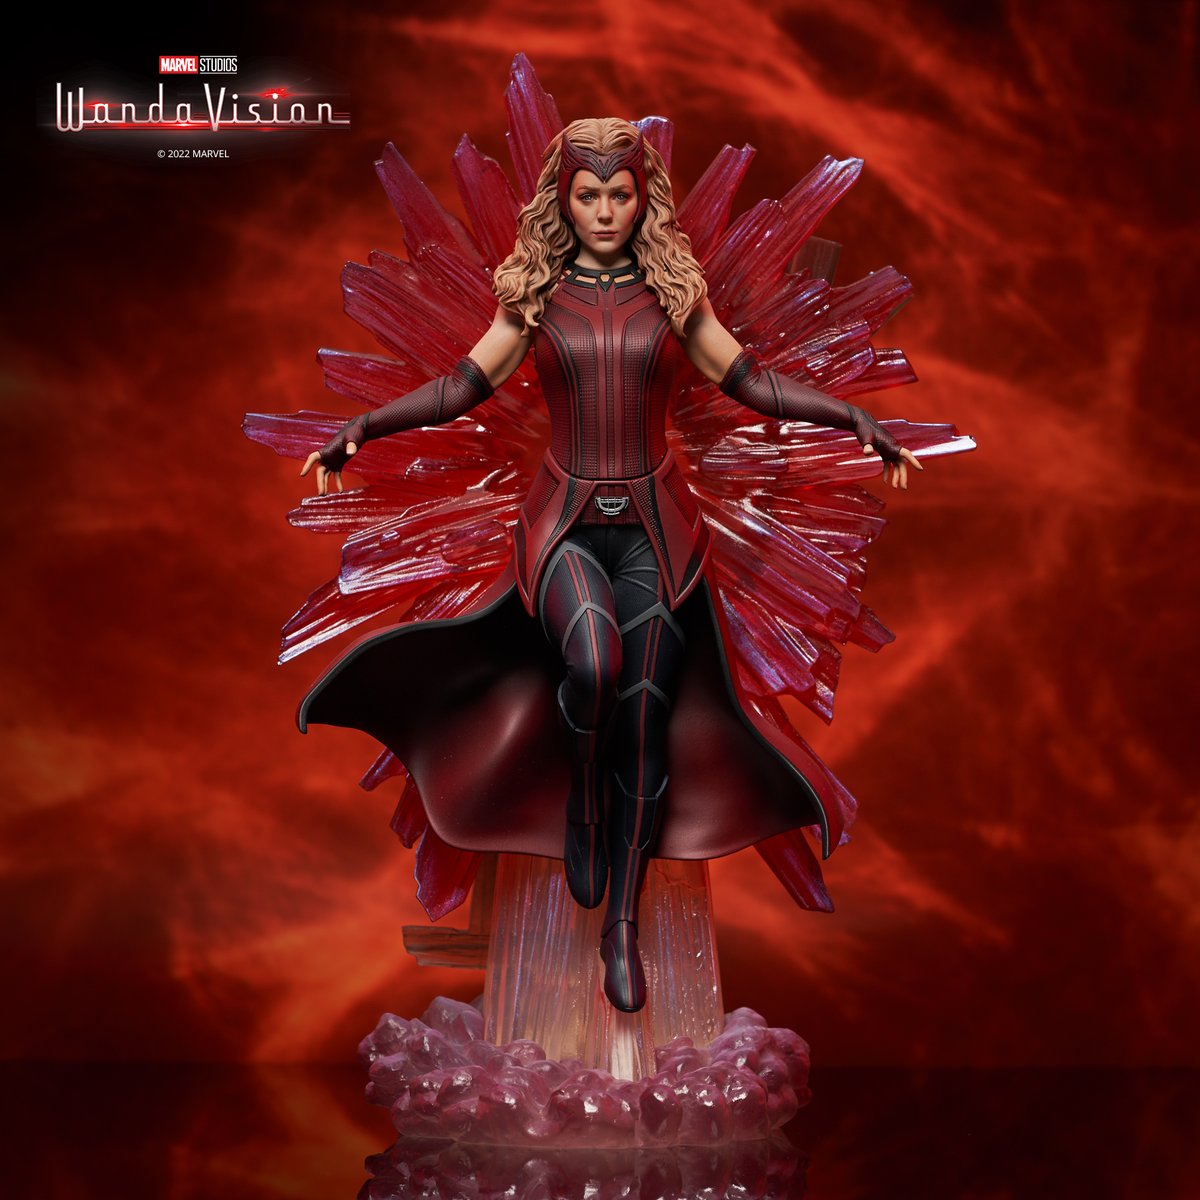 Her maternal touch is as innate as her unsurpassed control of mystic energy! The Marvel Studios' WandaVision Scarlet Witch Gallery Diorama is the perfect addition to any Marvel collection this #MothersDay! bit.ly/WandaVision_Ga… Shop Mother's Day Gifts -